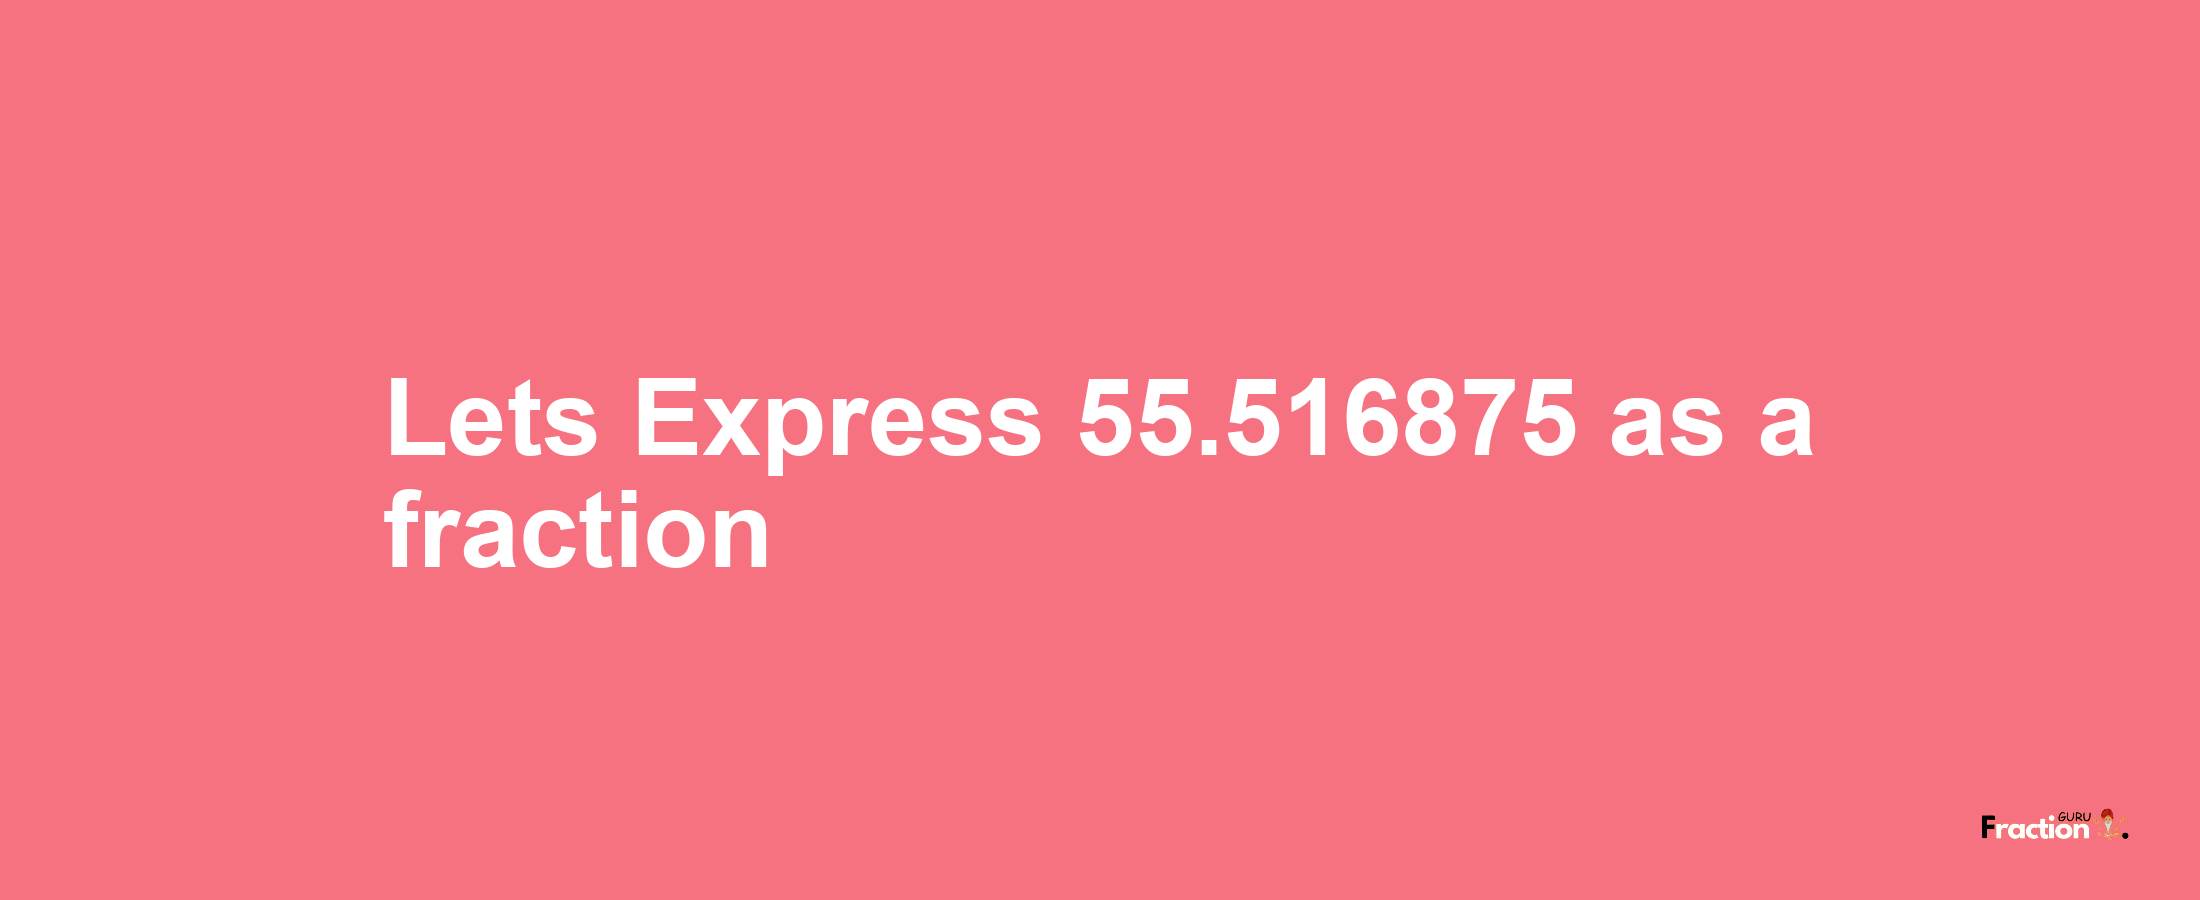 Lets Express 55.516875 as afraction